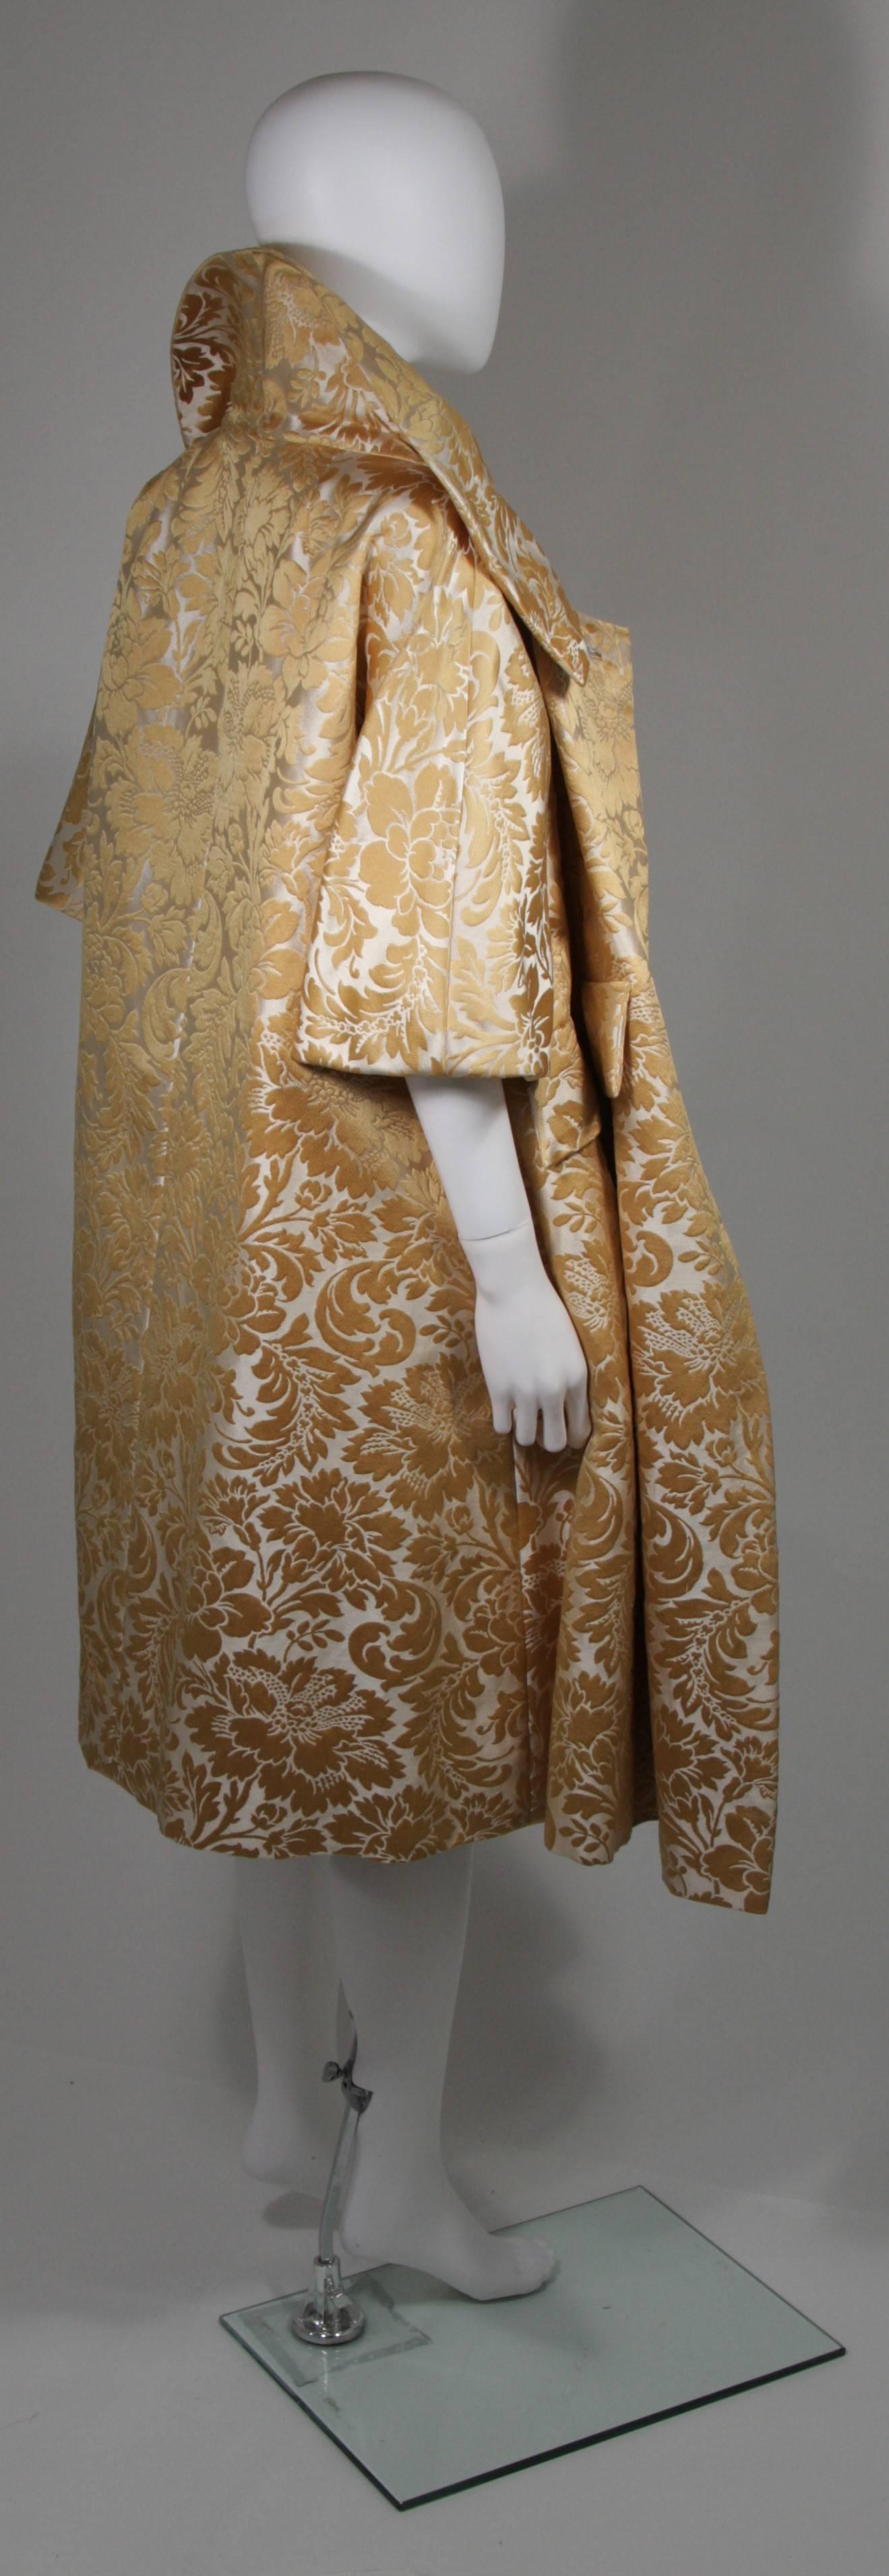 Samuel Winston Gold and Cream Brocade Evening Ensemble Size Small  In Excellent Condition For Sale In Los Angeles, CA